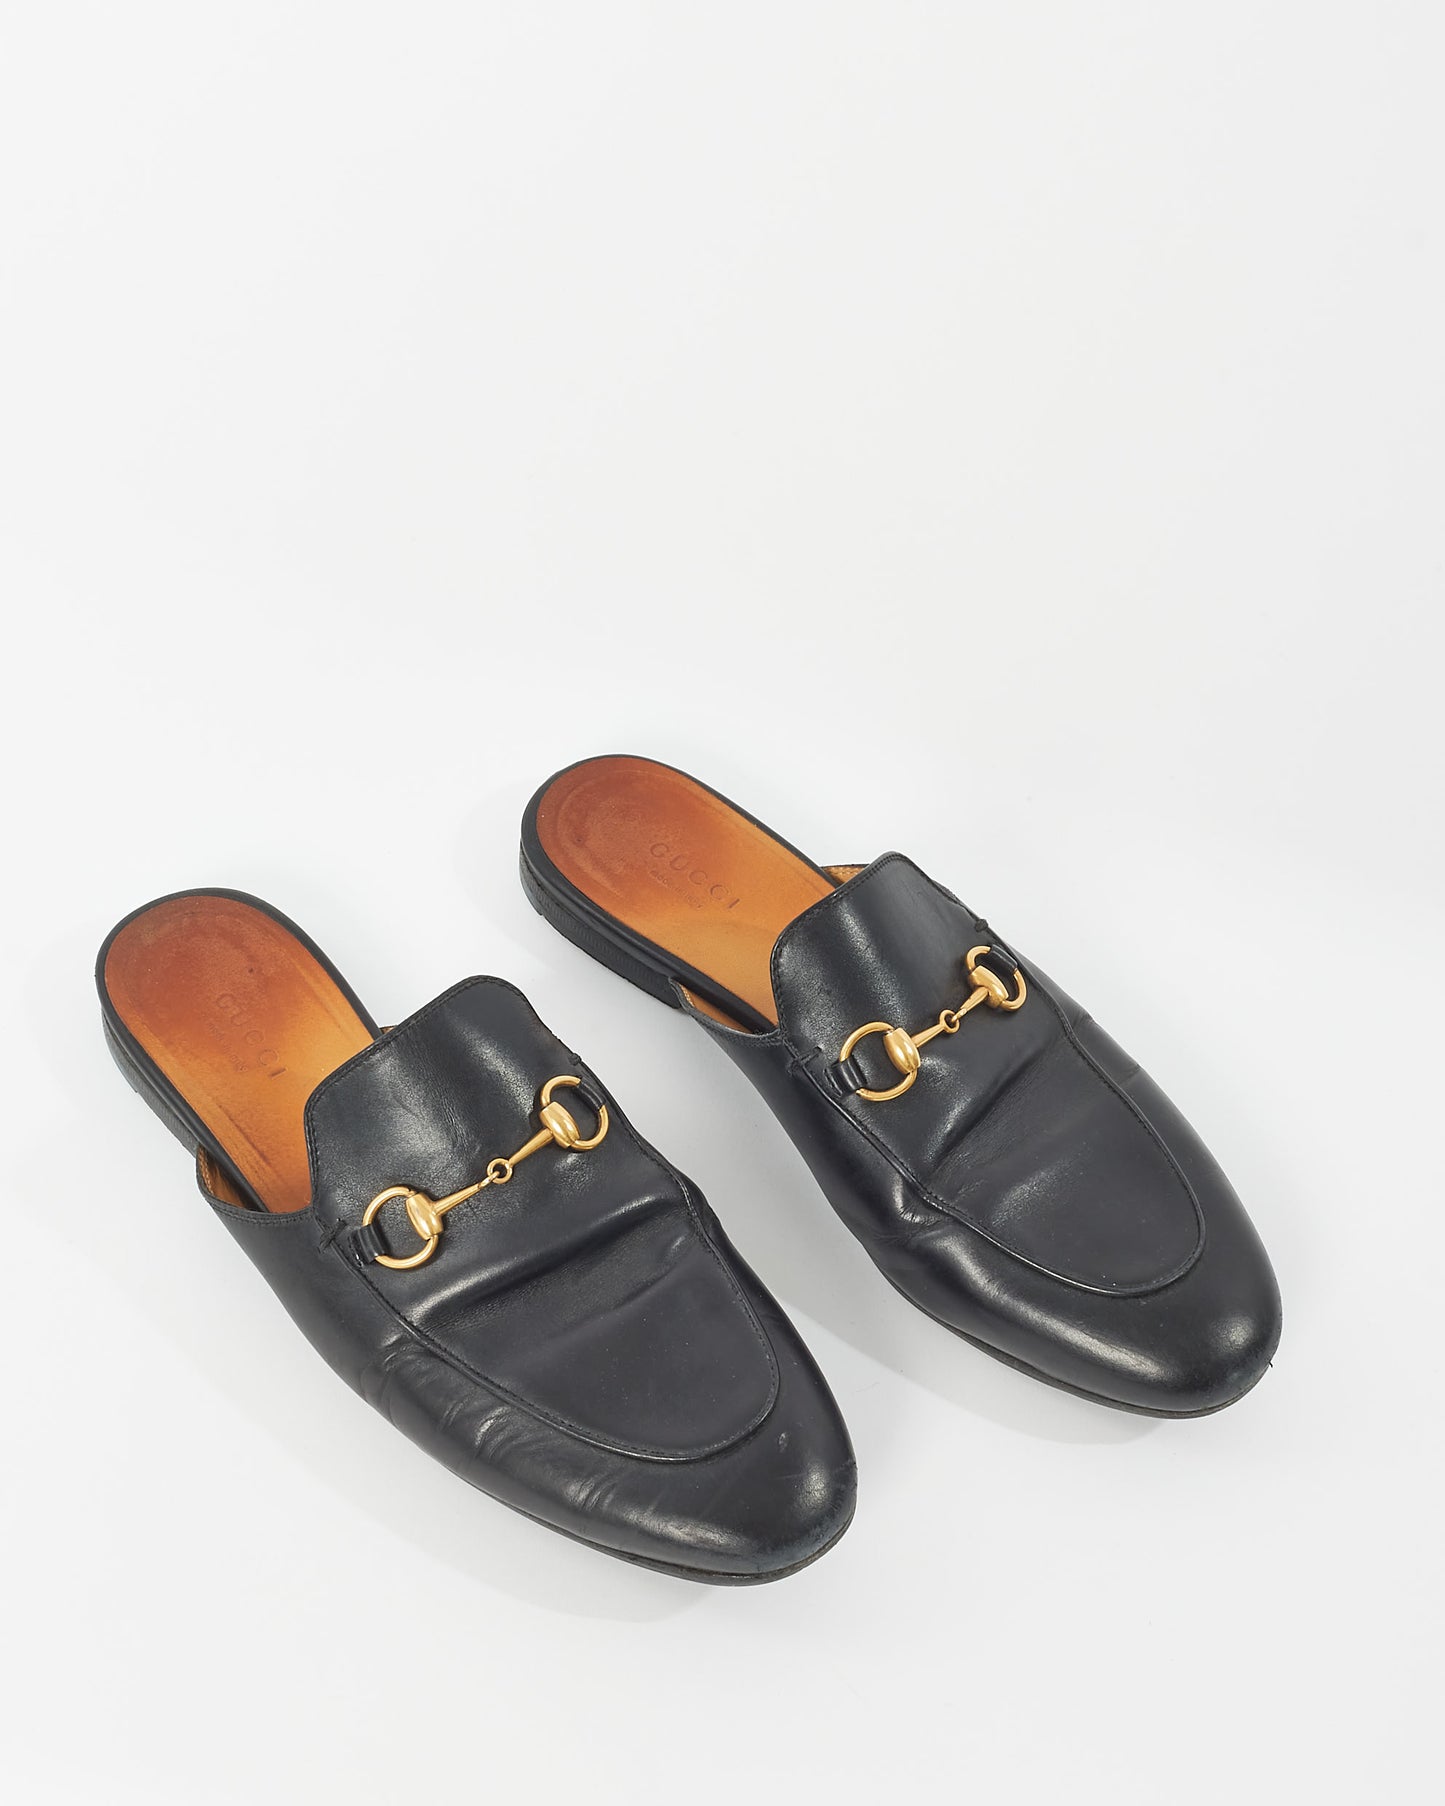 Gucci Black Leather Princeton Slip On Loafers - 38